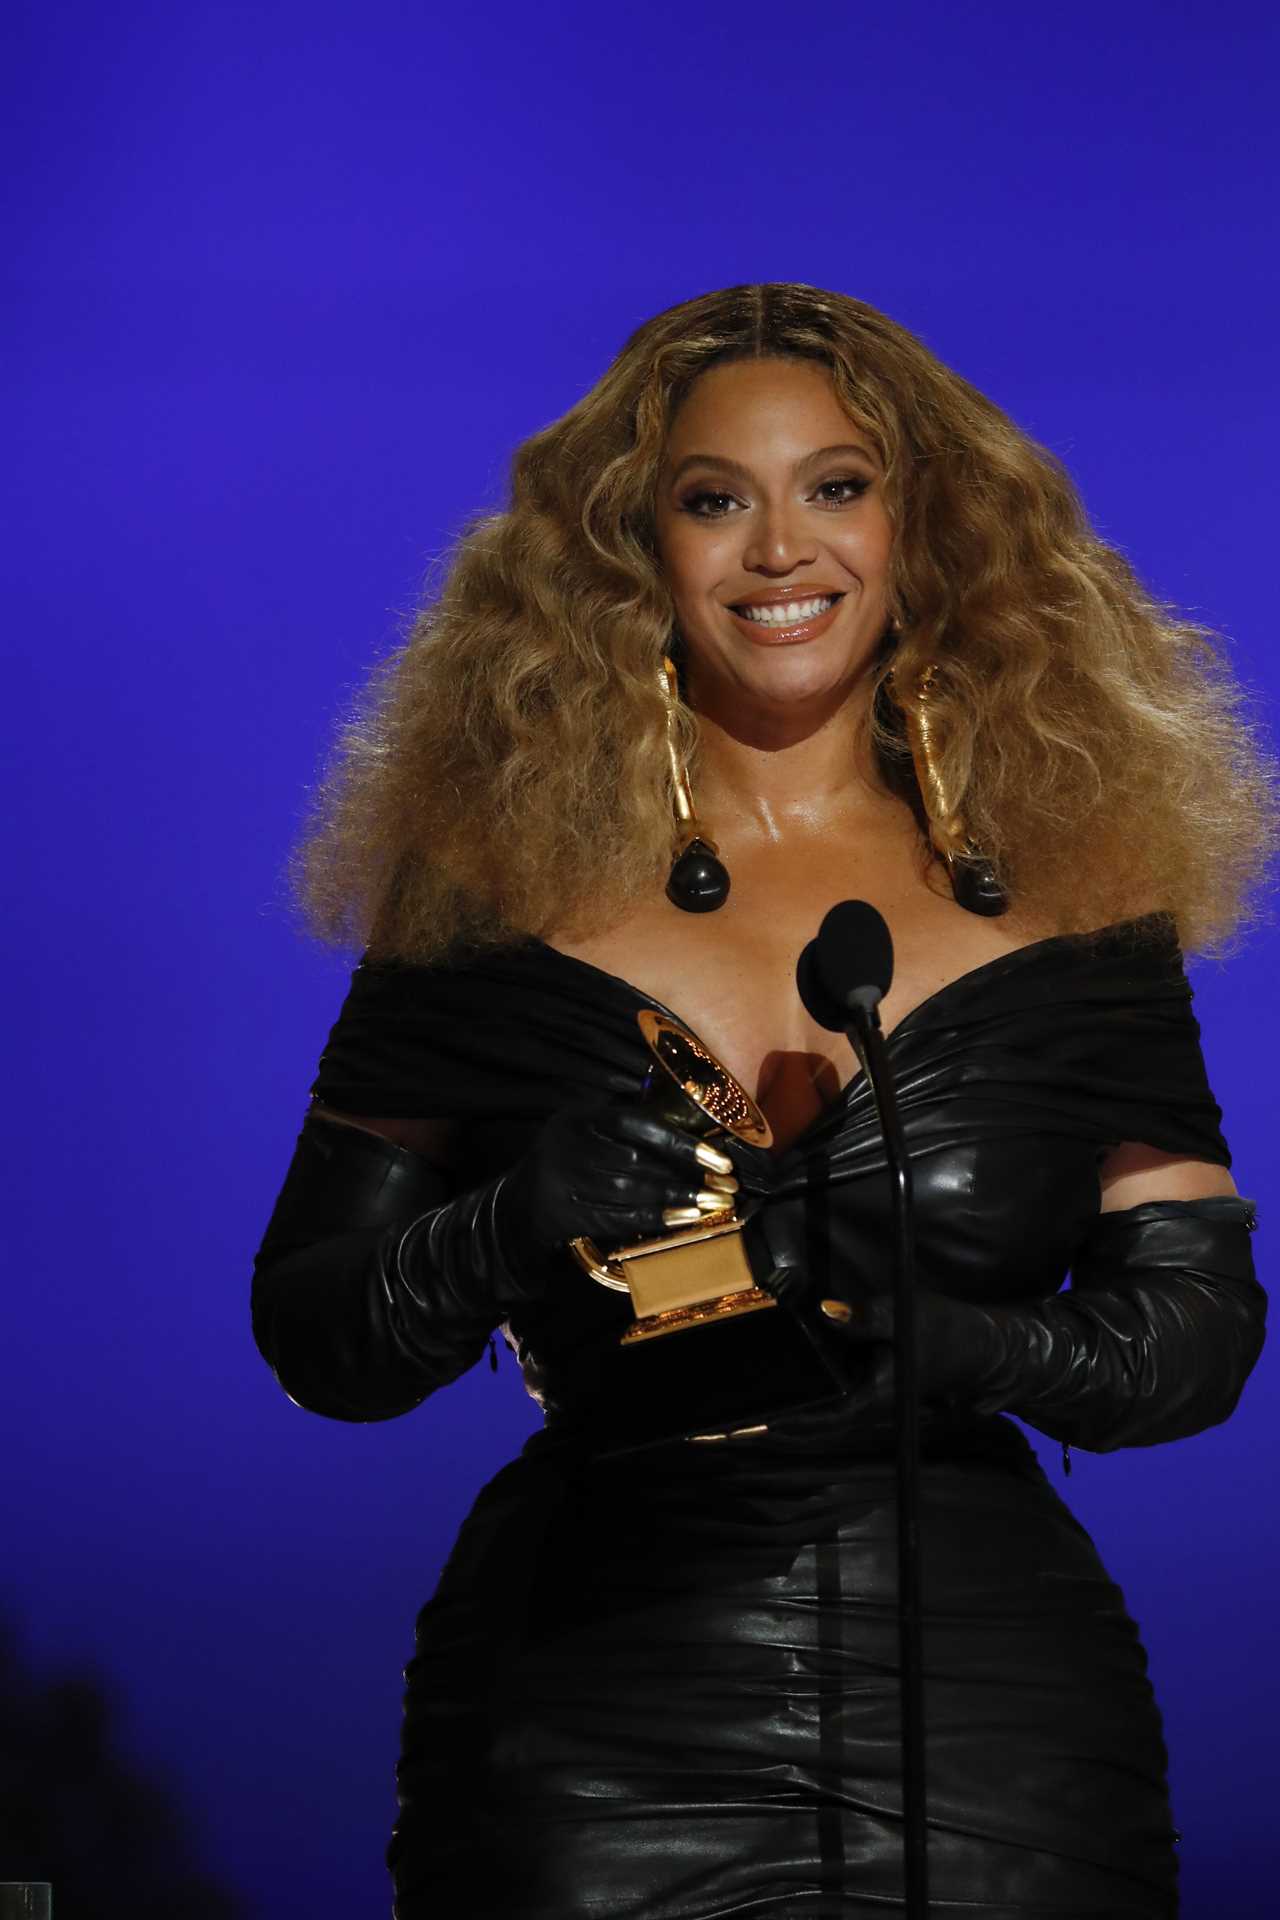 Beyonce shocks Grammy fans by missing her own award in awkward live TV blunder- and viewers refuse to believe her excuse